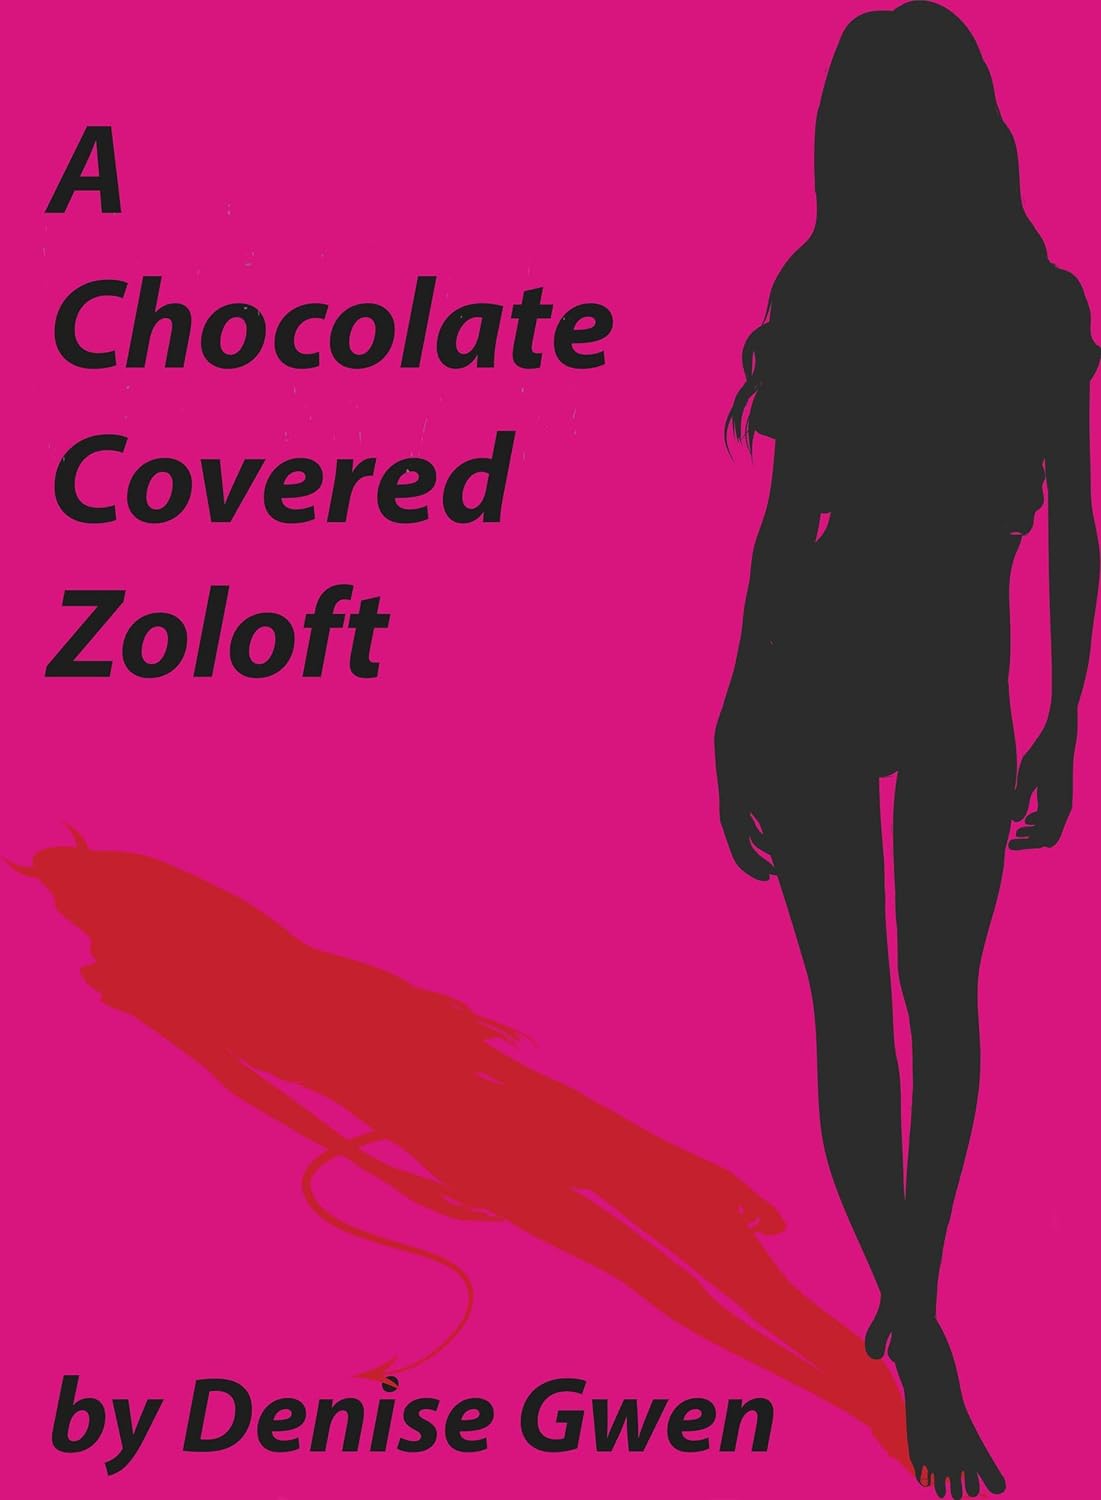 A Chocolate Covered Zoloft